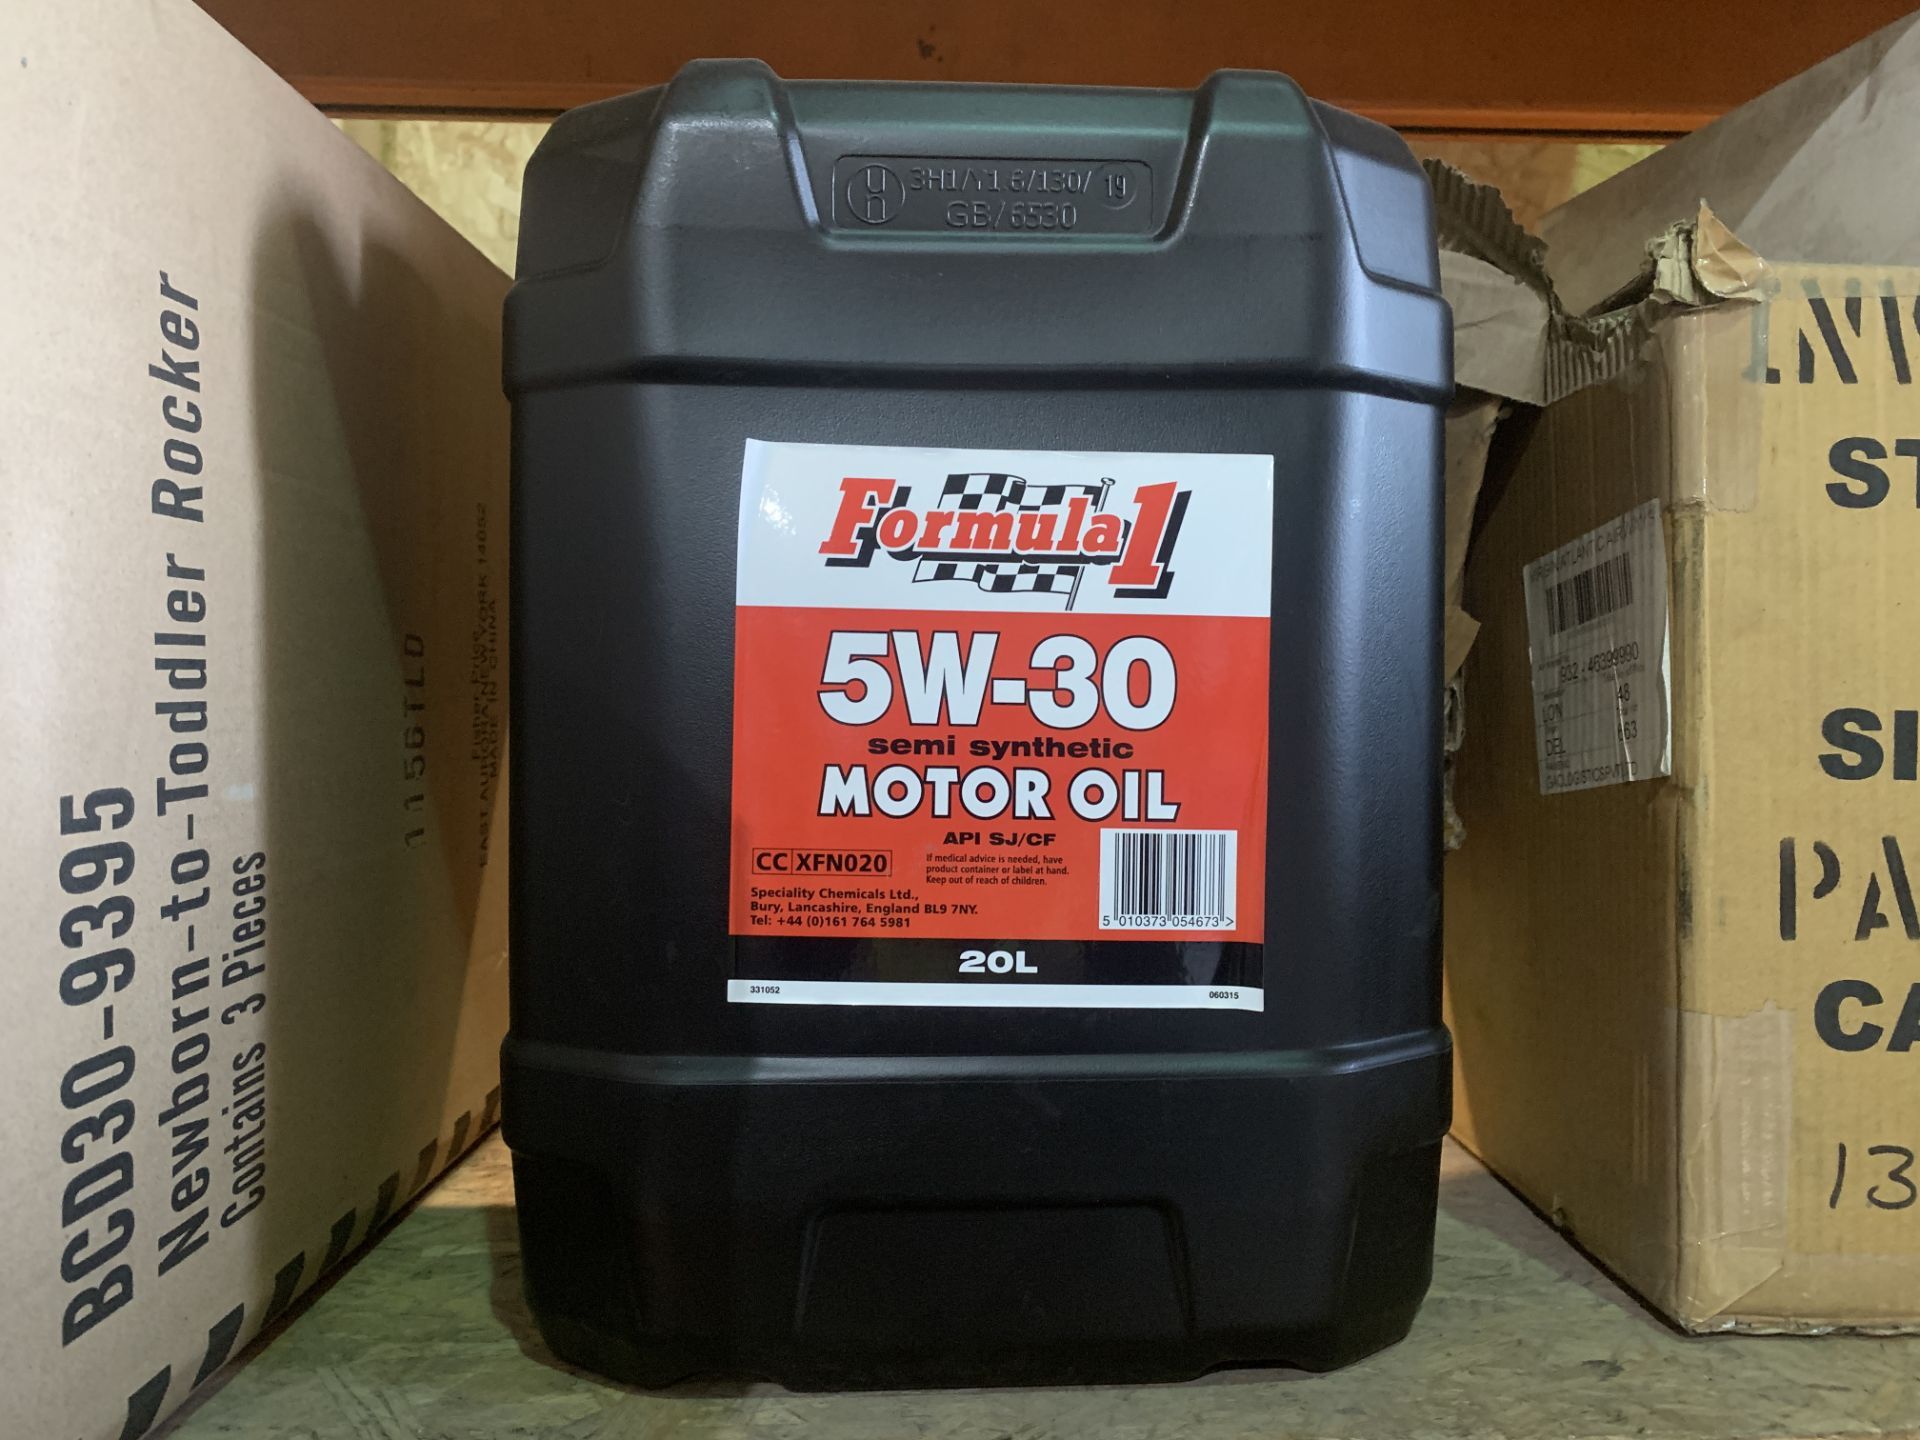 2 X NEW SEALED 20L TUBS OF FORMULA 1 5W-30 SEMI SYNTHETIC MOTOR OIL. (ROW11)